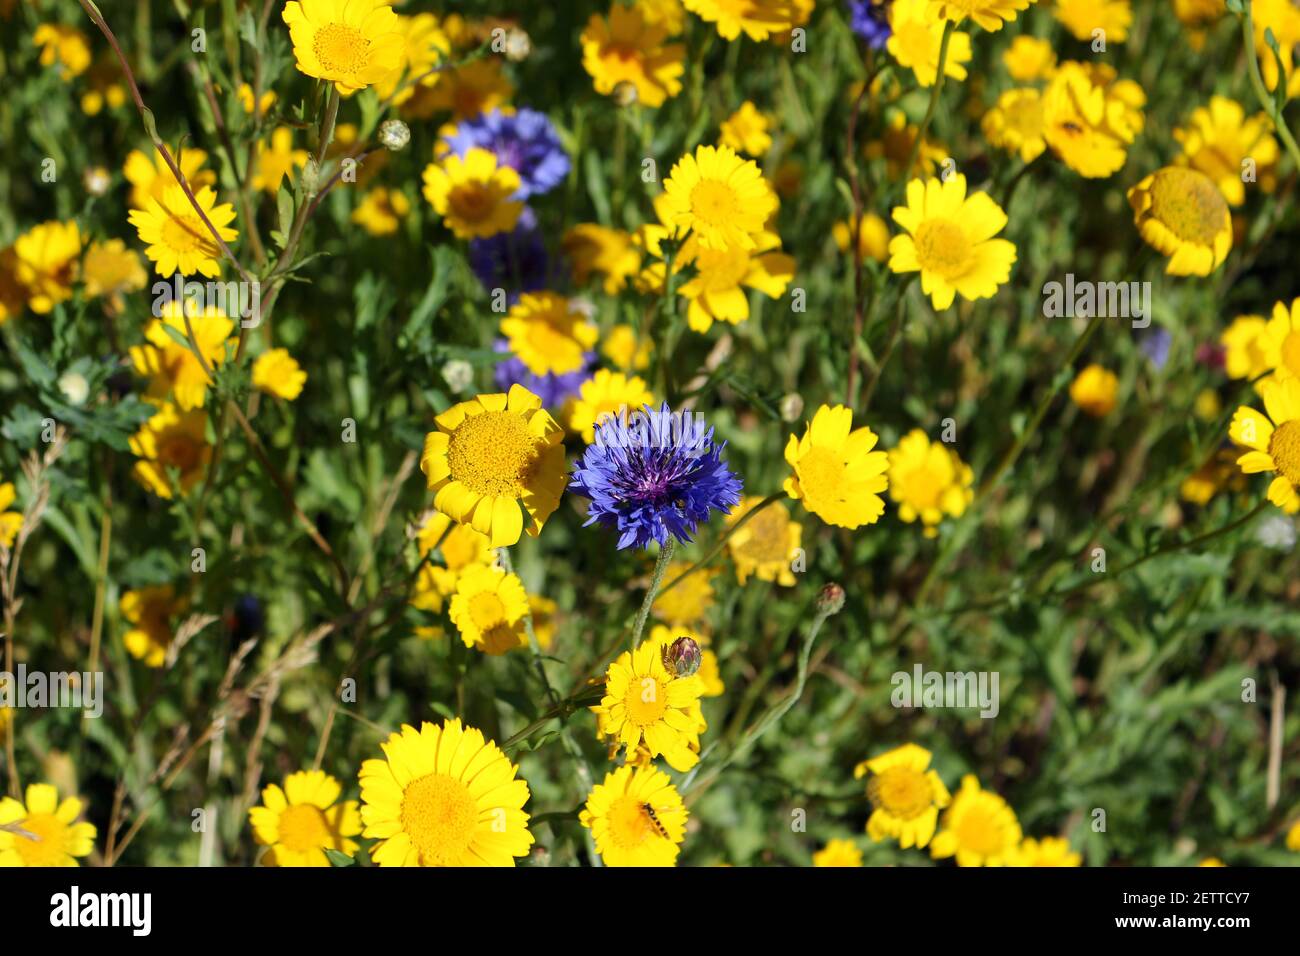 Corn marigolds and cornflowers growing in the garden Stock Photo